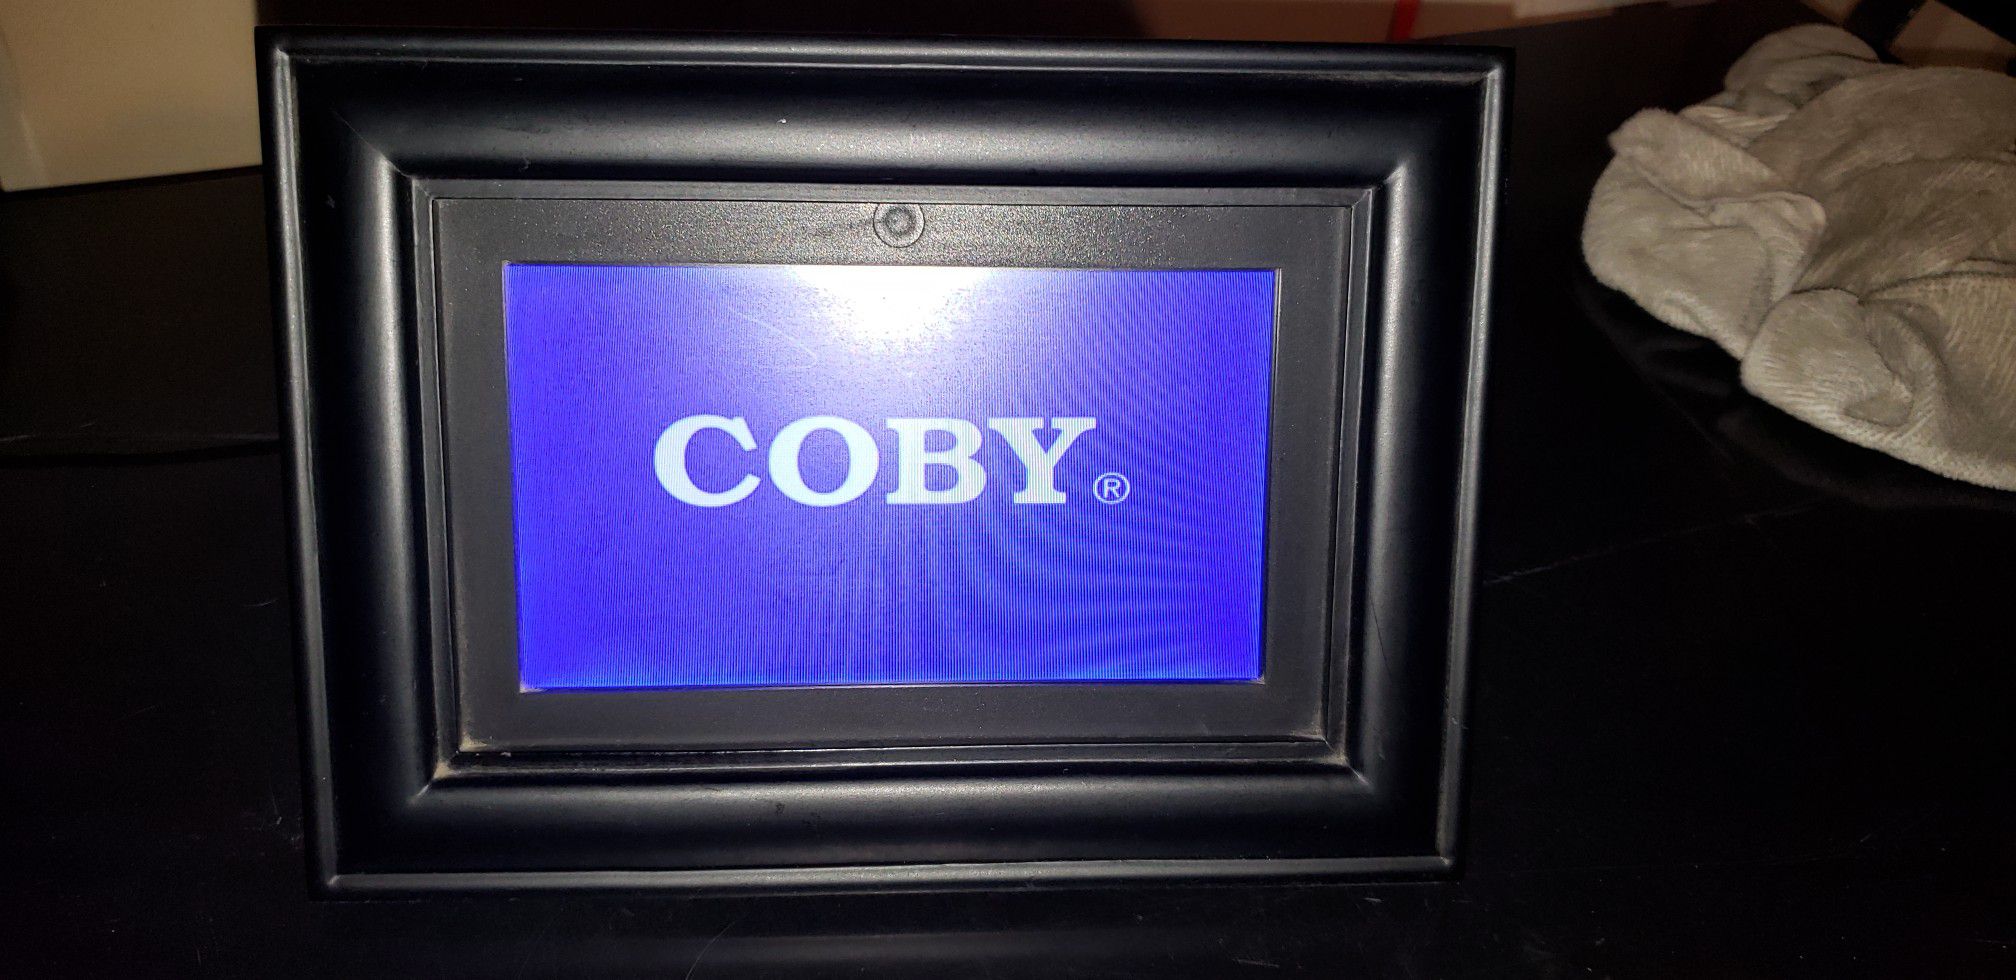 Coby photo frame